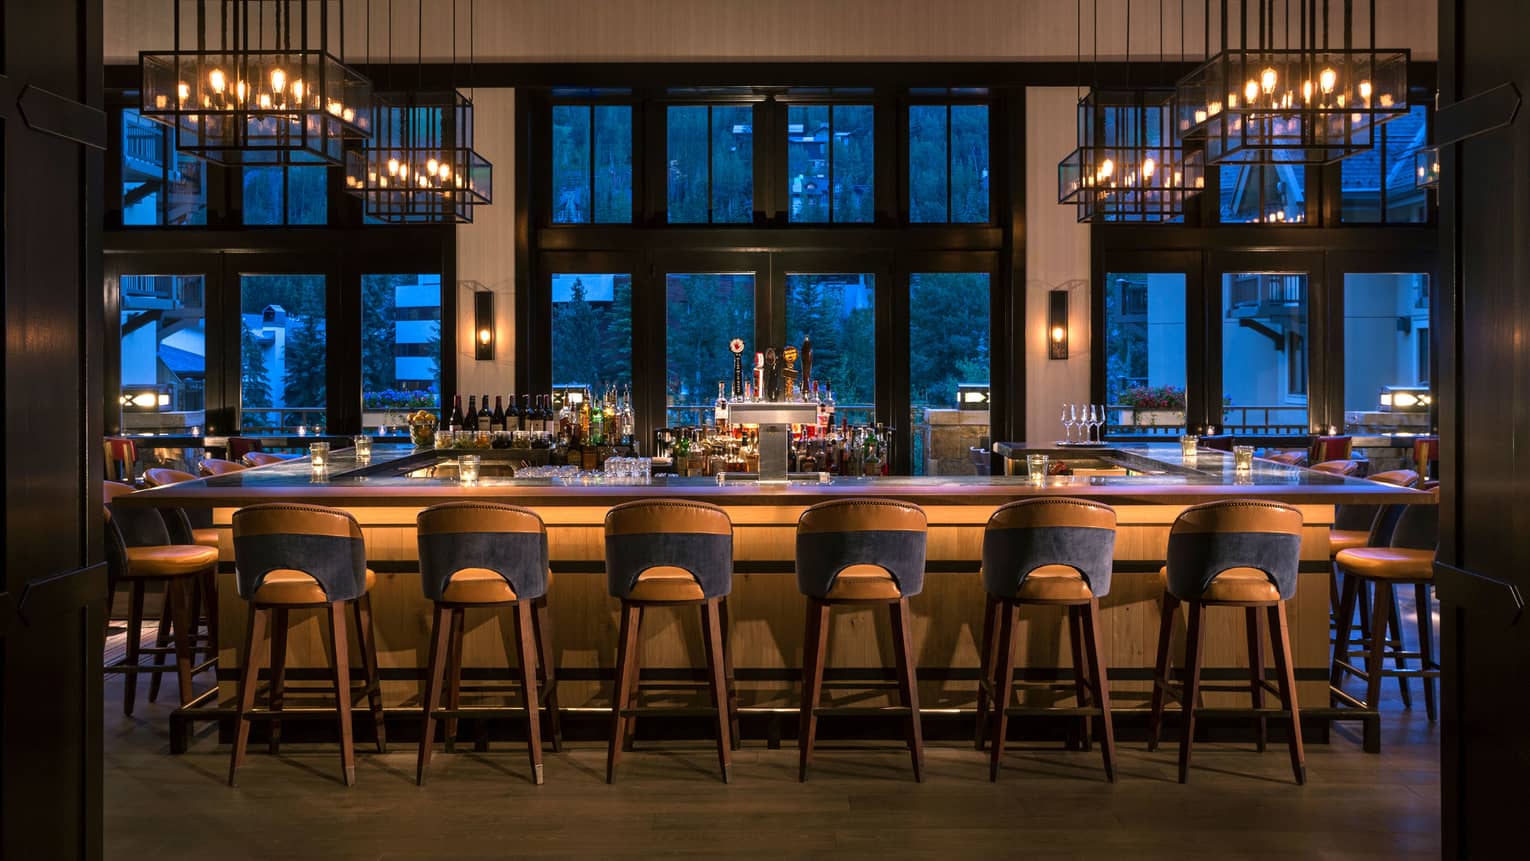 Dimly-lit bar at dusk lined with retro-style wood stools, lantern chandeliers above, large windows